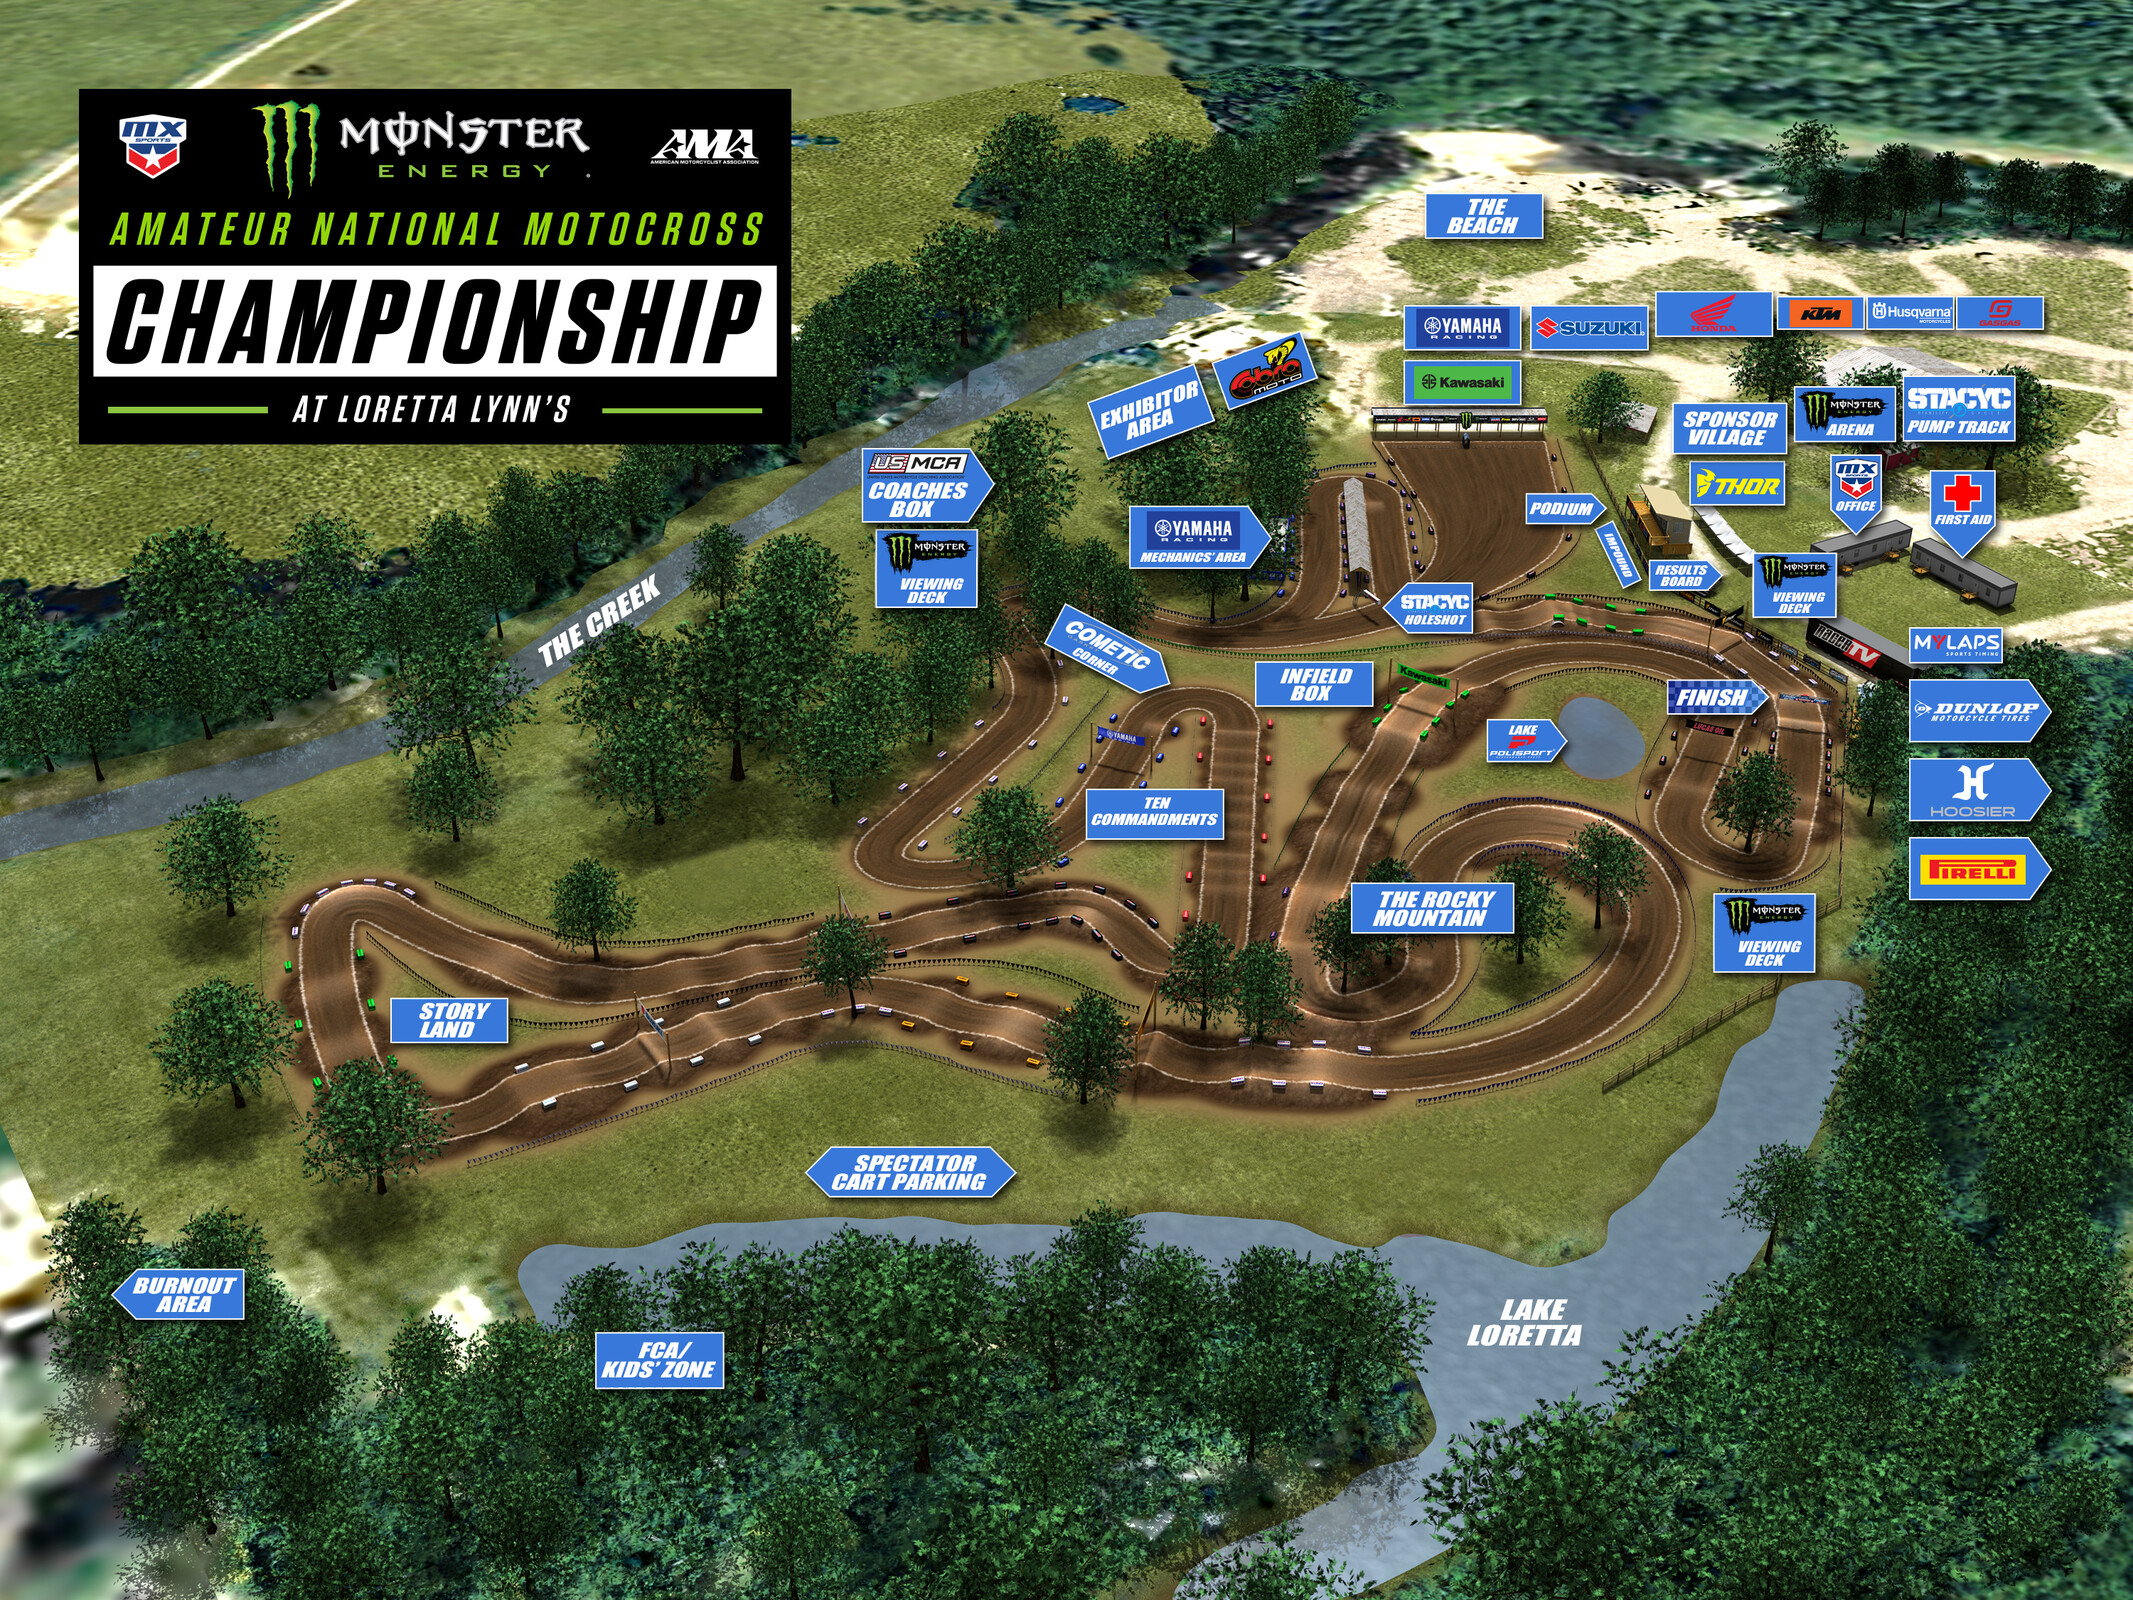 Facility and Track Maps